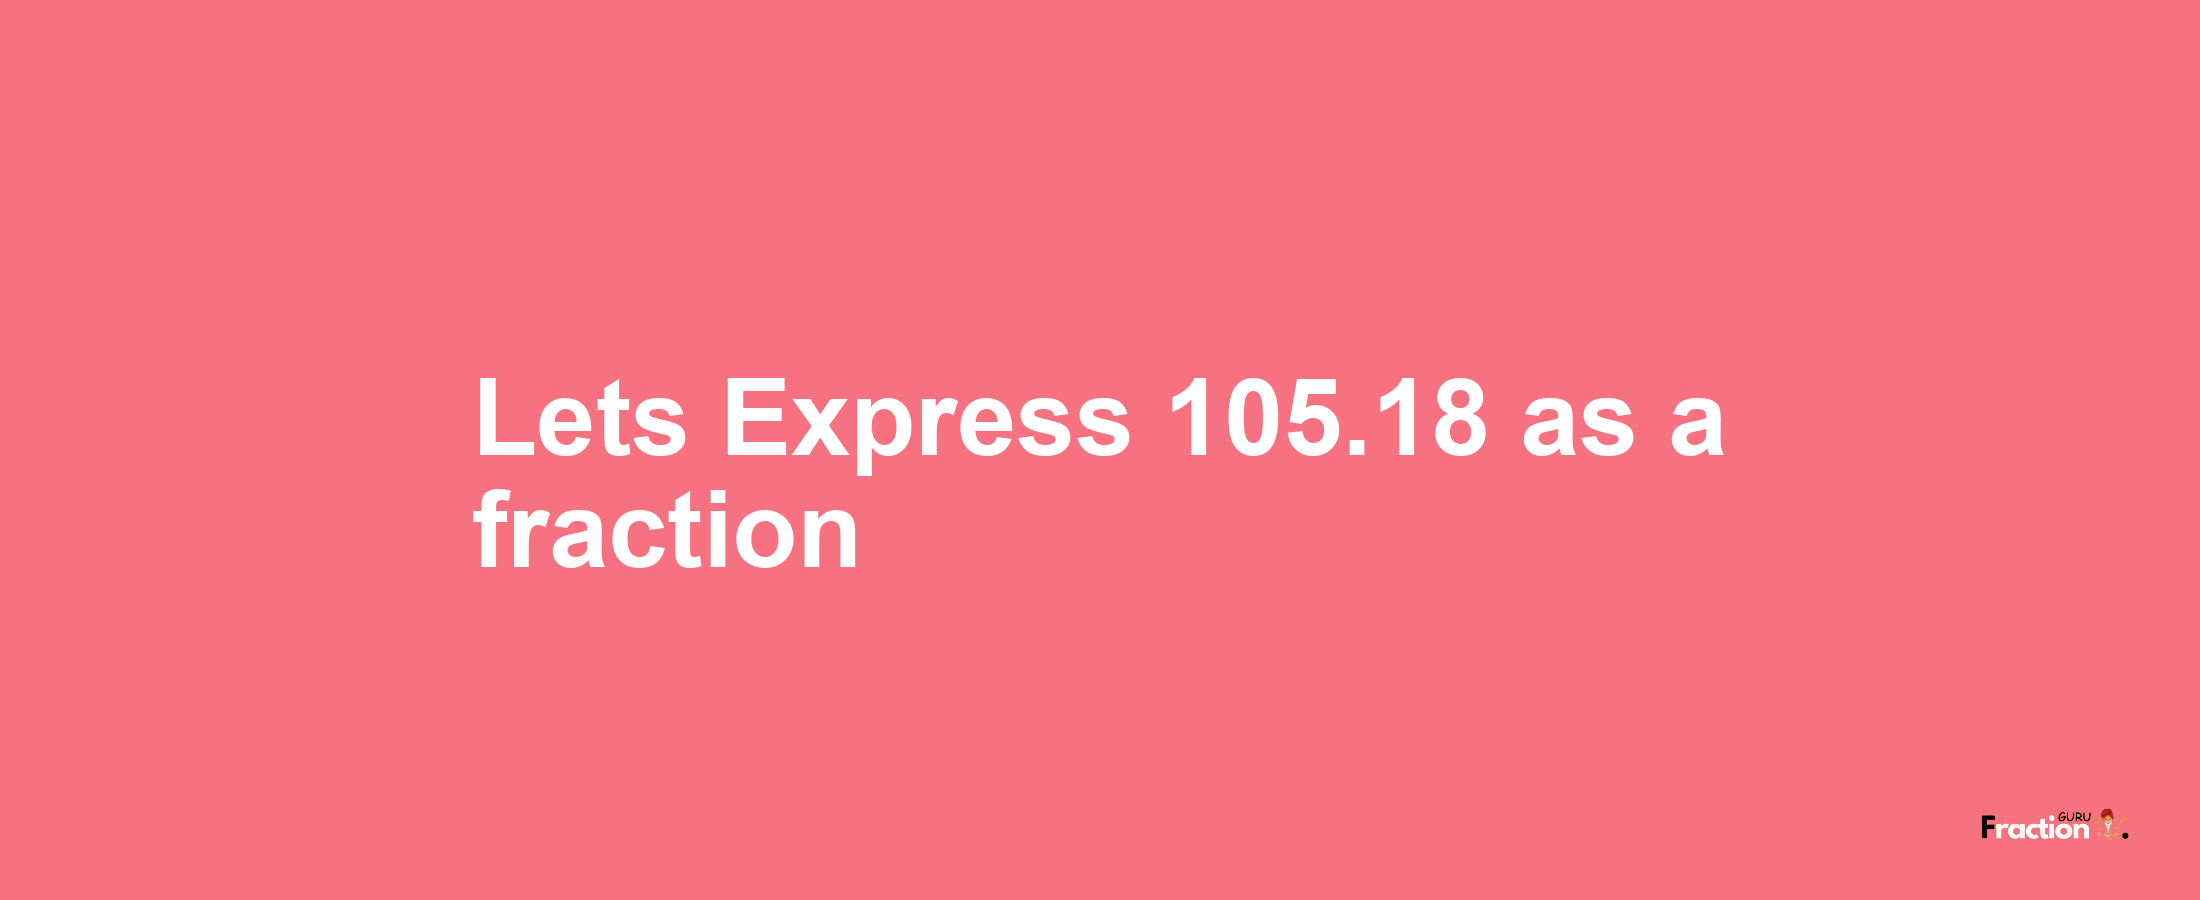 Lets Express 105.18 as afraction